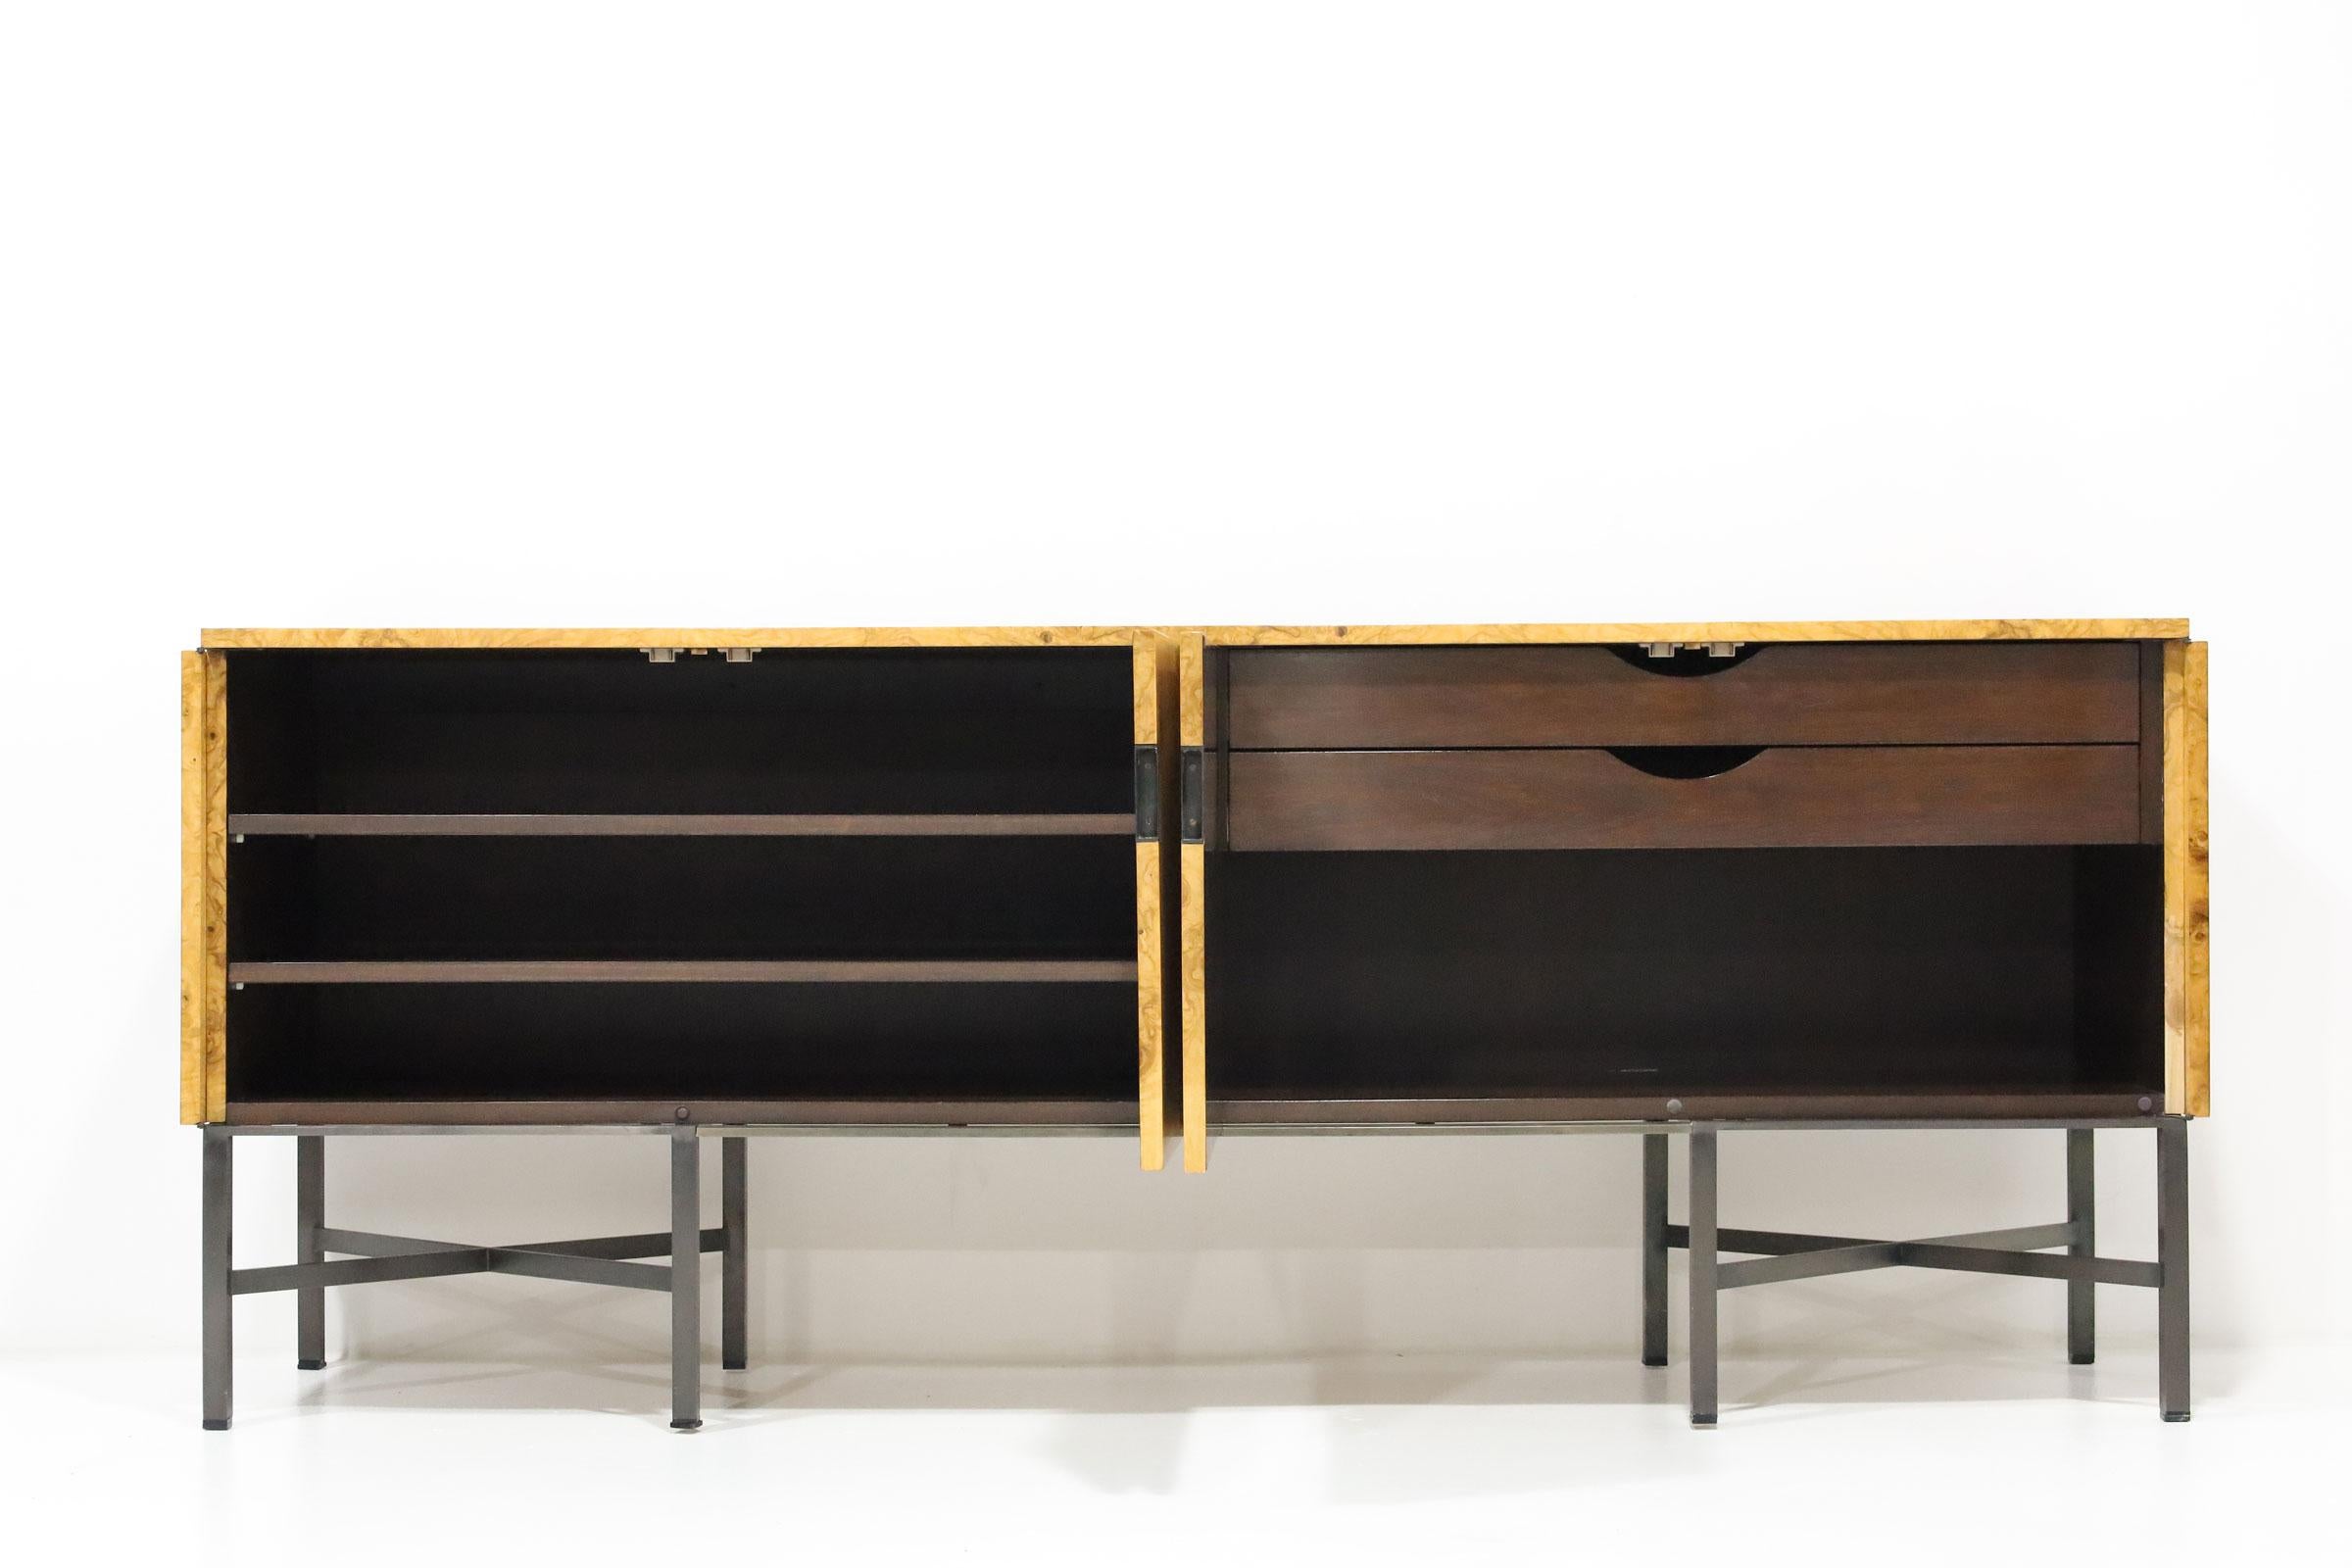 A stunning burled olivewood credenza designed by Roger Sprunger for Dunbar. The credenza features gorgeous wood grain and clean, sleek modern lines. The wood case rests on black metal legs. The cabinet offers ample room for storage. One cabinet